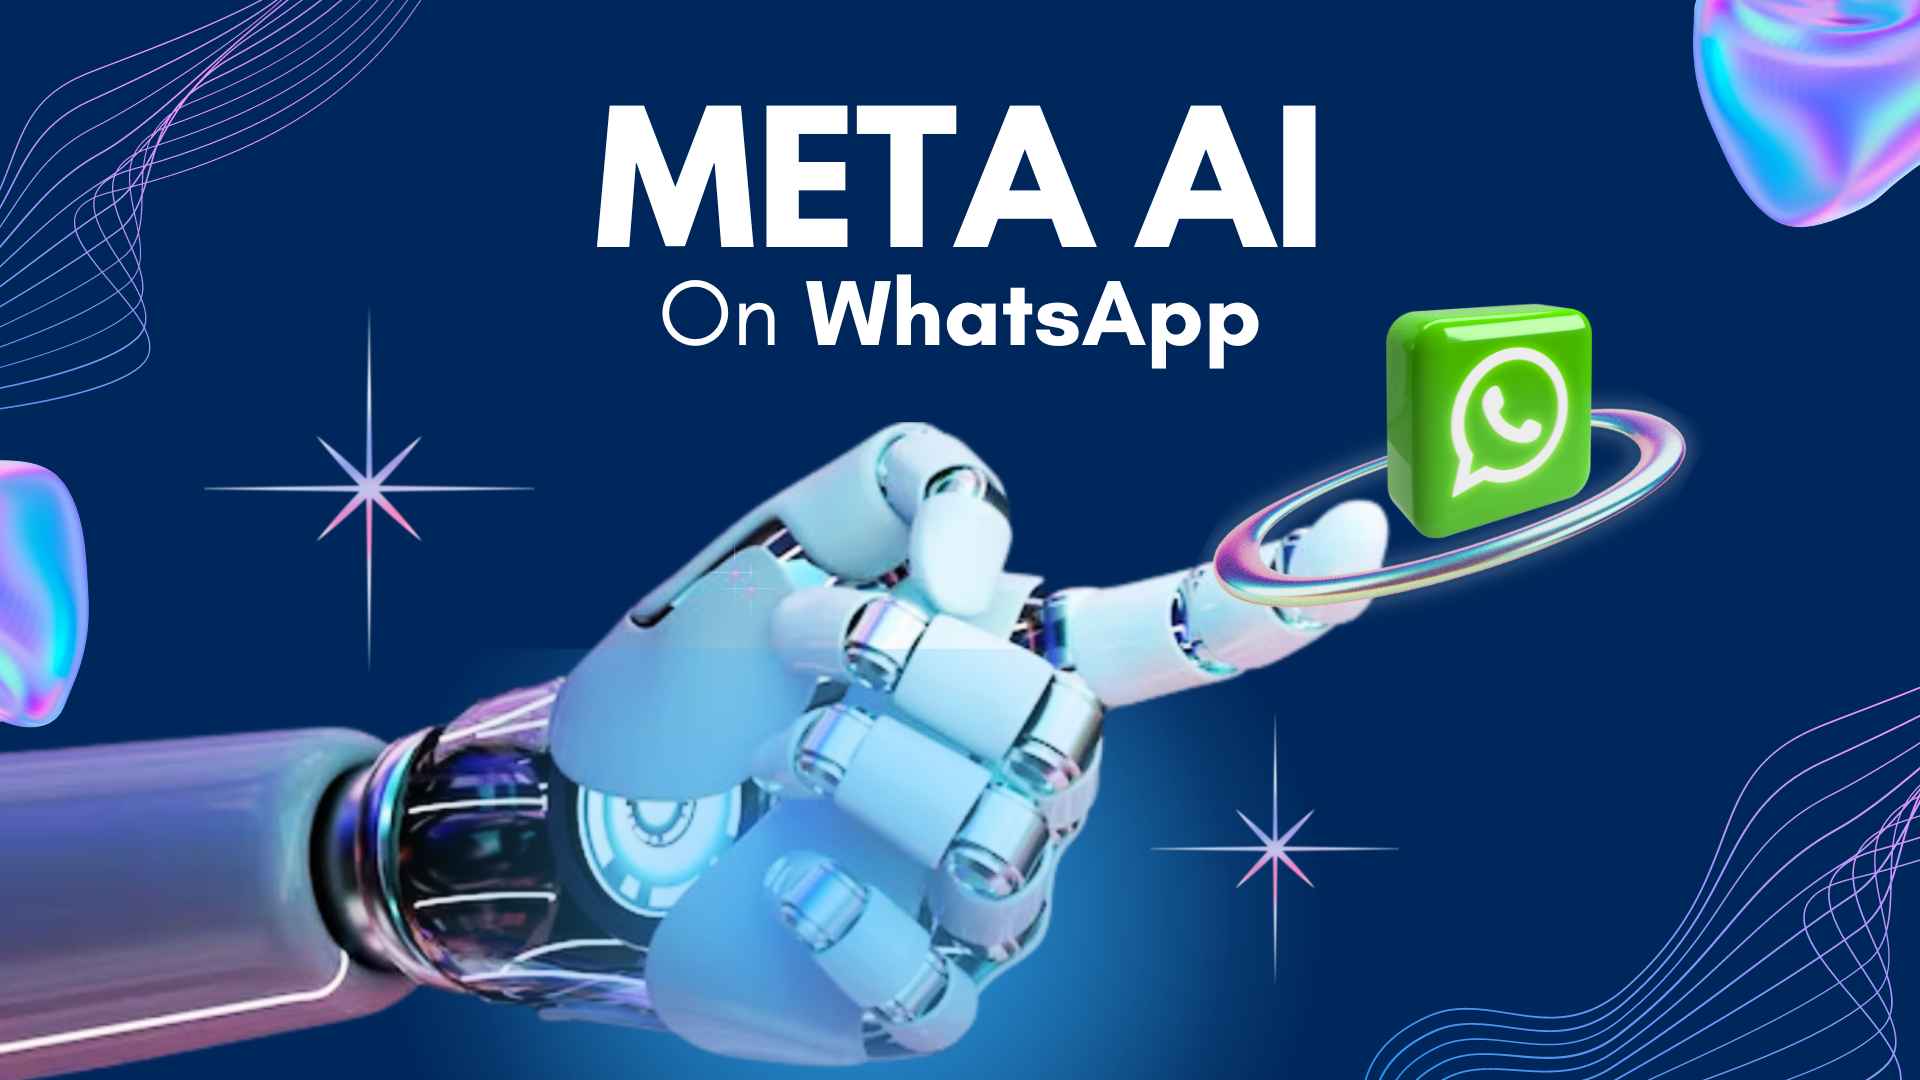 How can Chat With Meta AI On WhatsApp